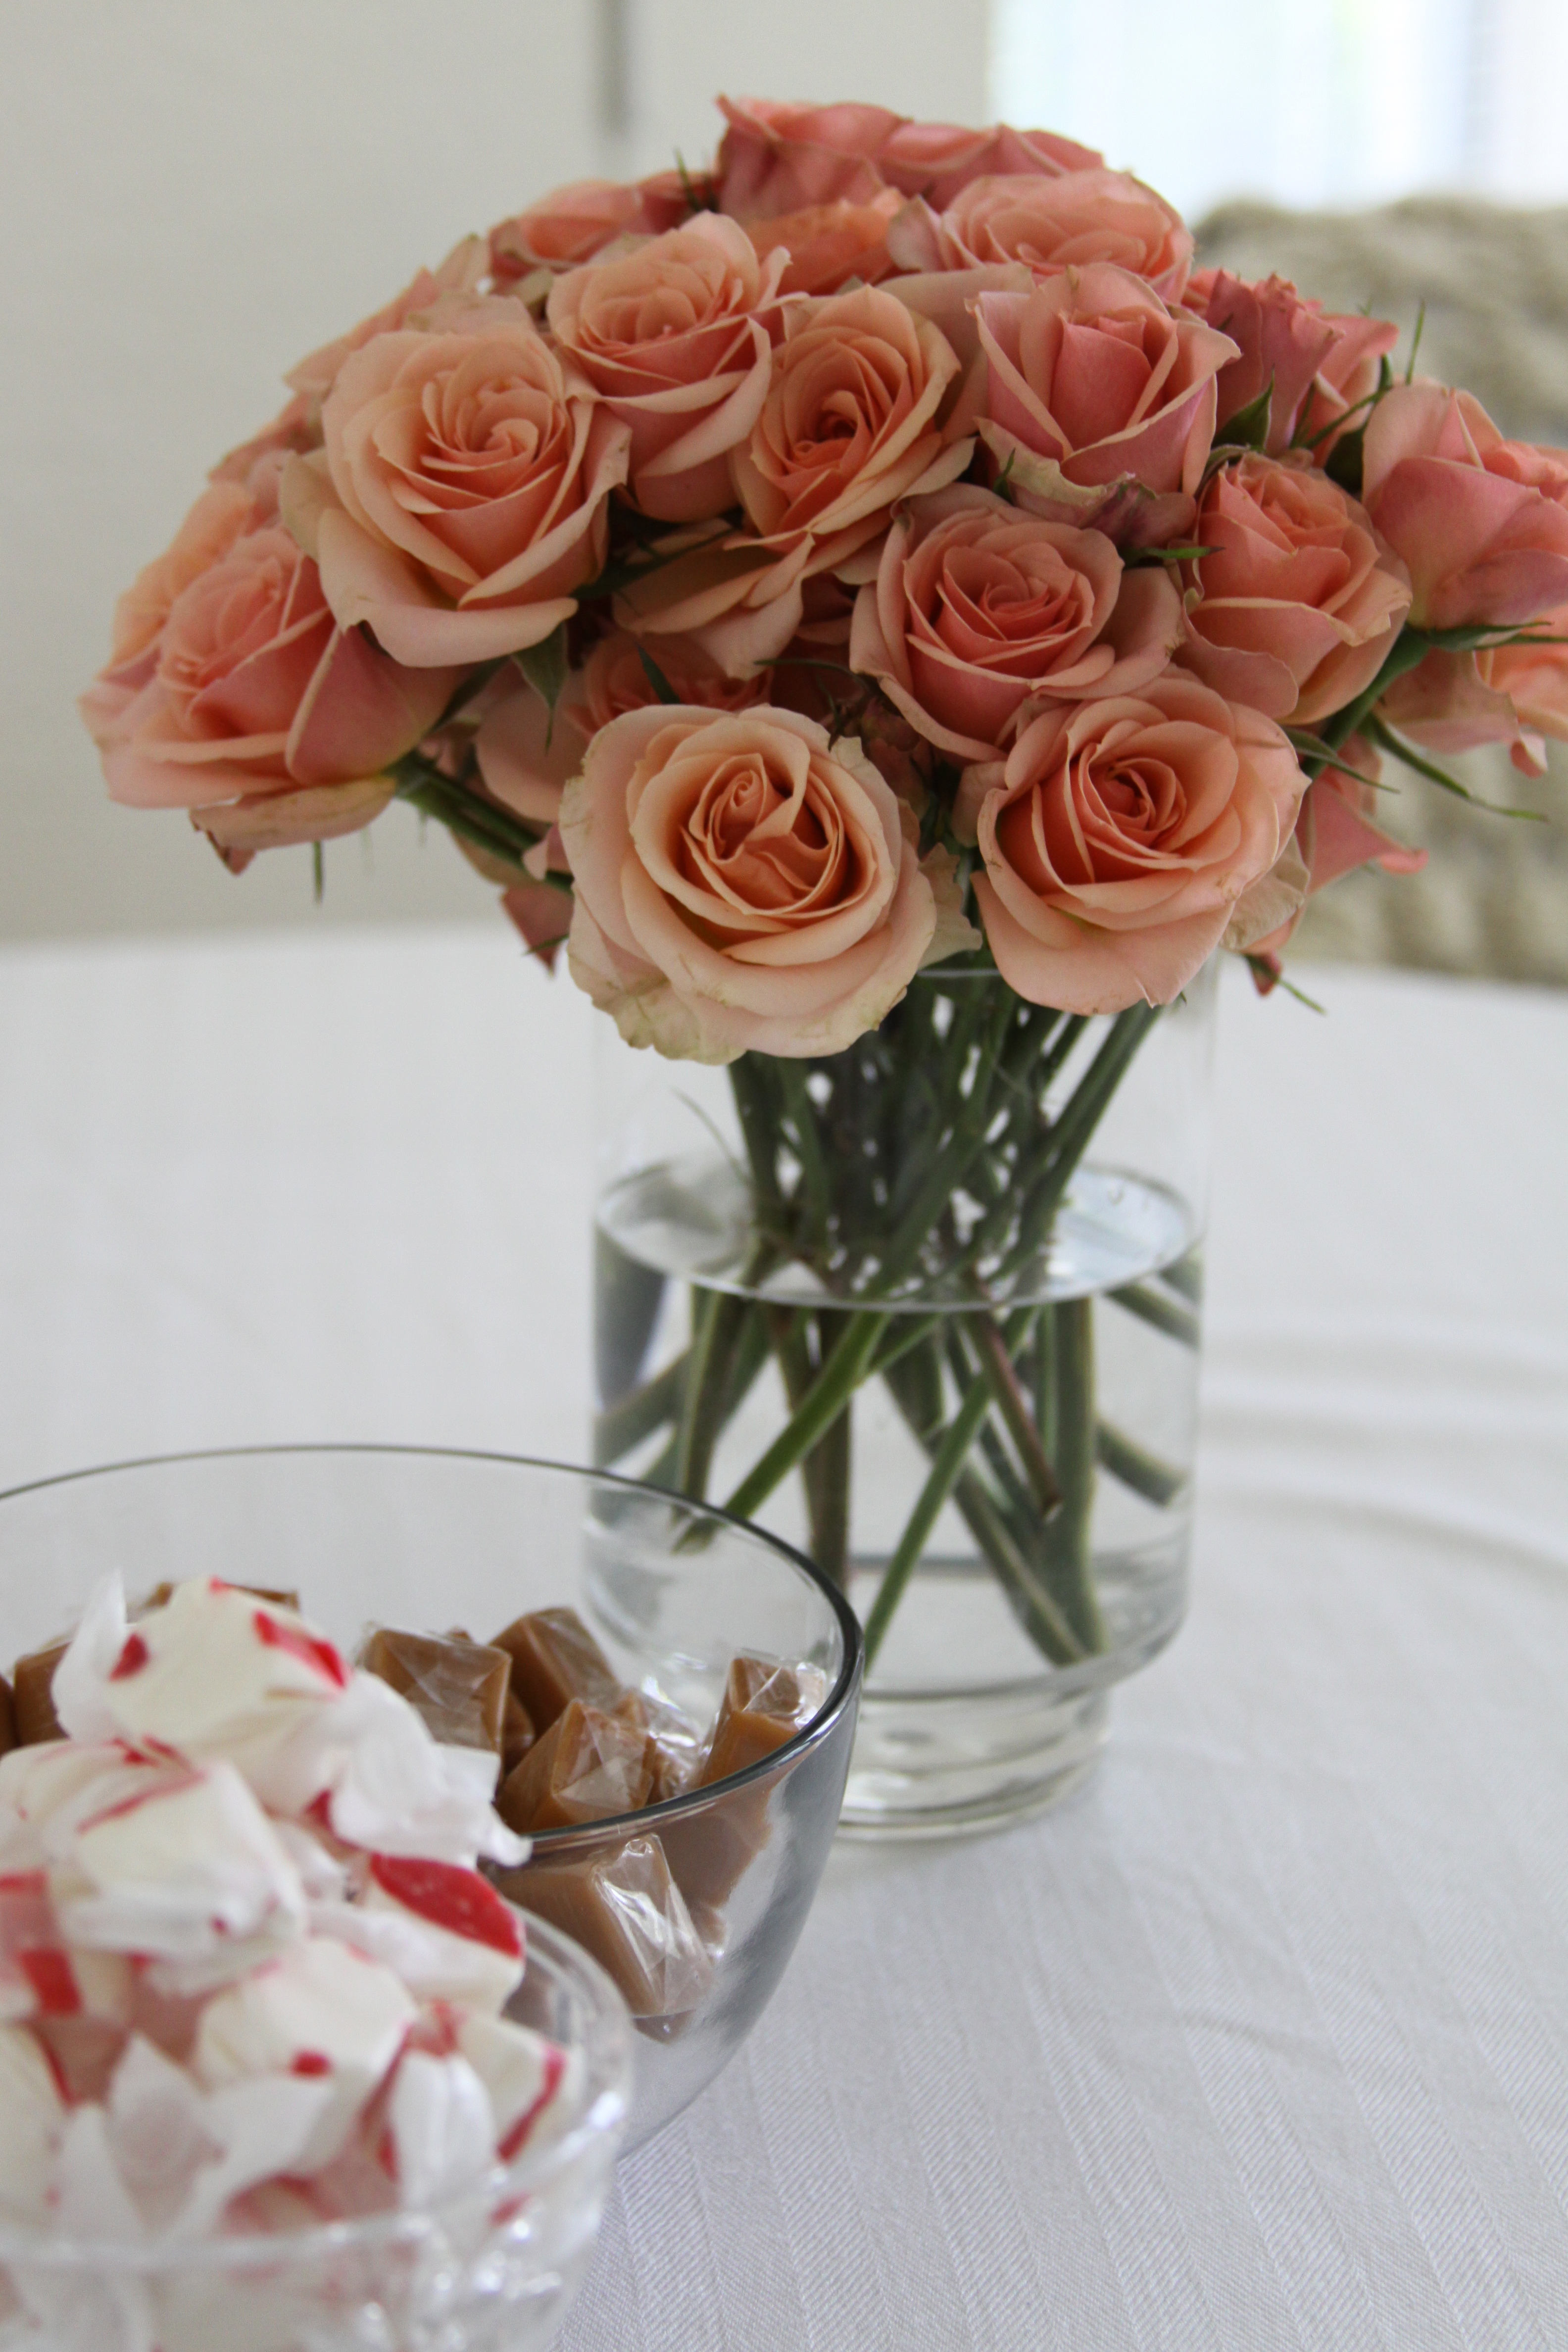 Roses Flowers Bouquet Vase Candy